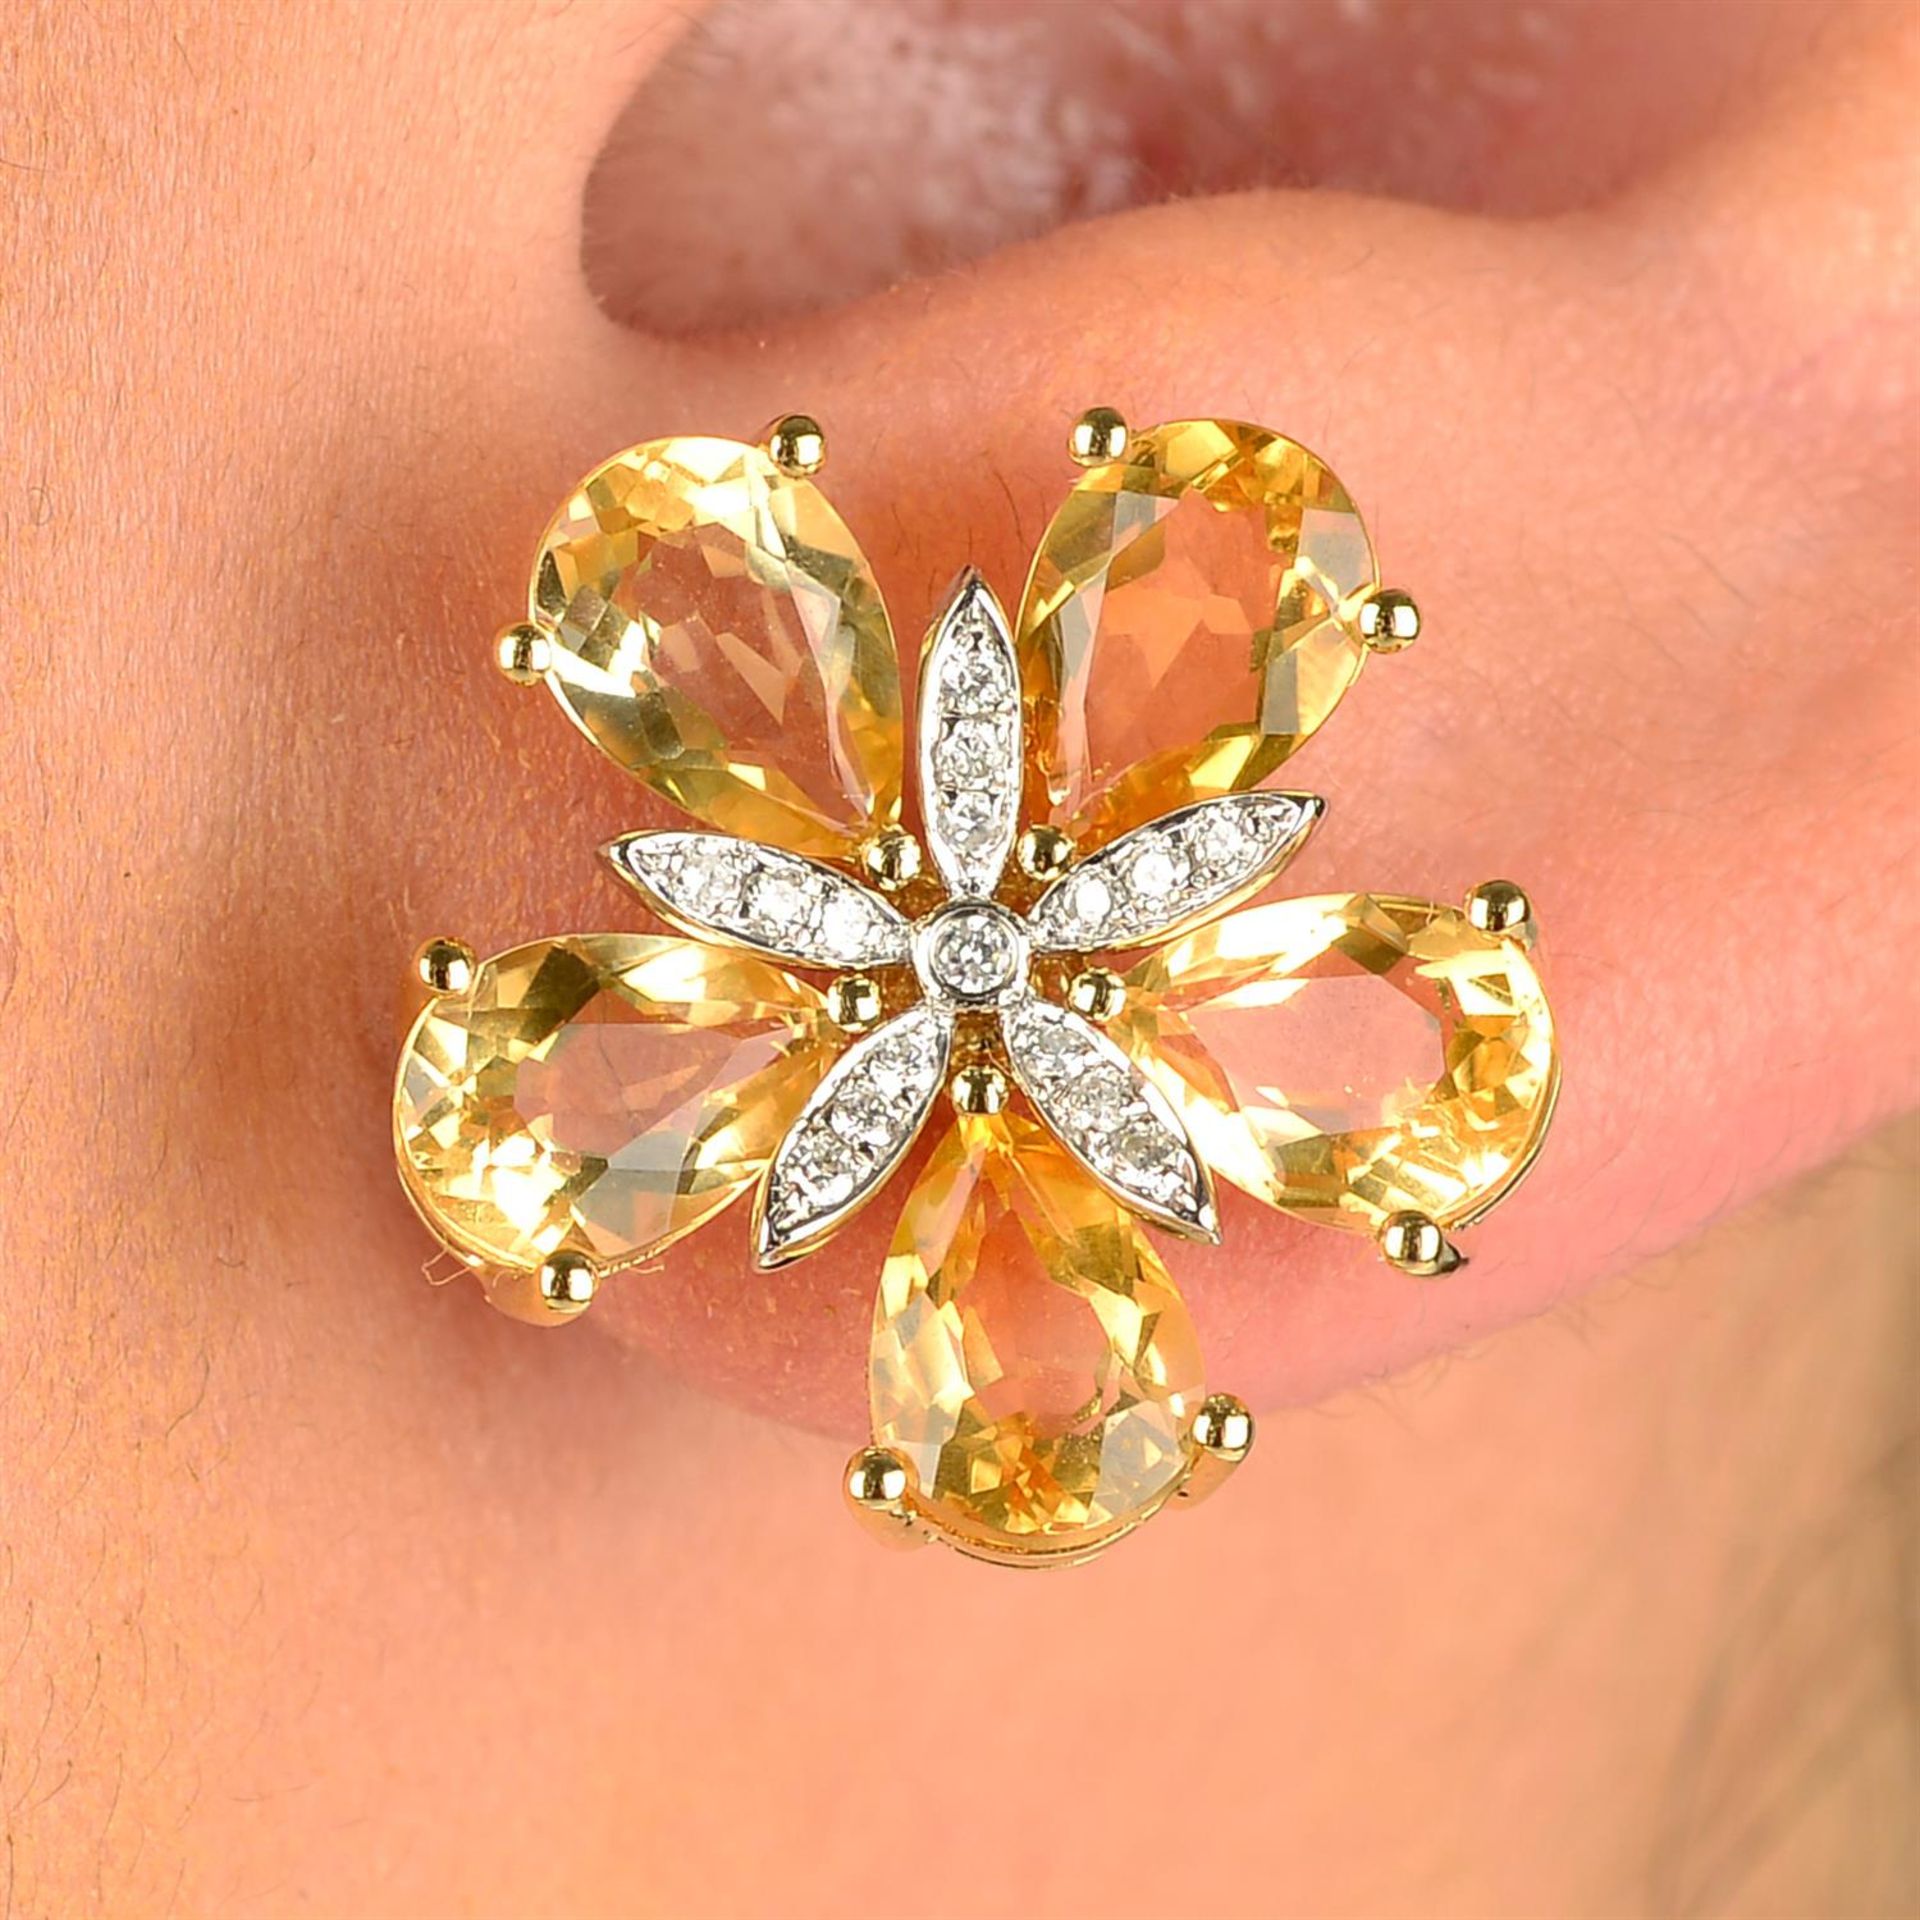 A pair of citrine and brilliant-cut diamond floral earrings.